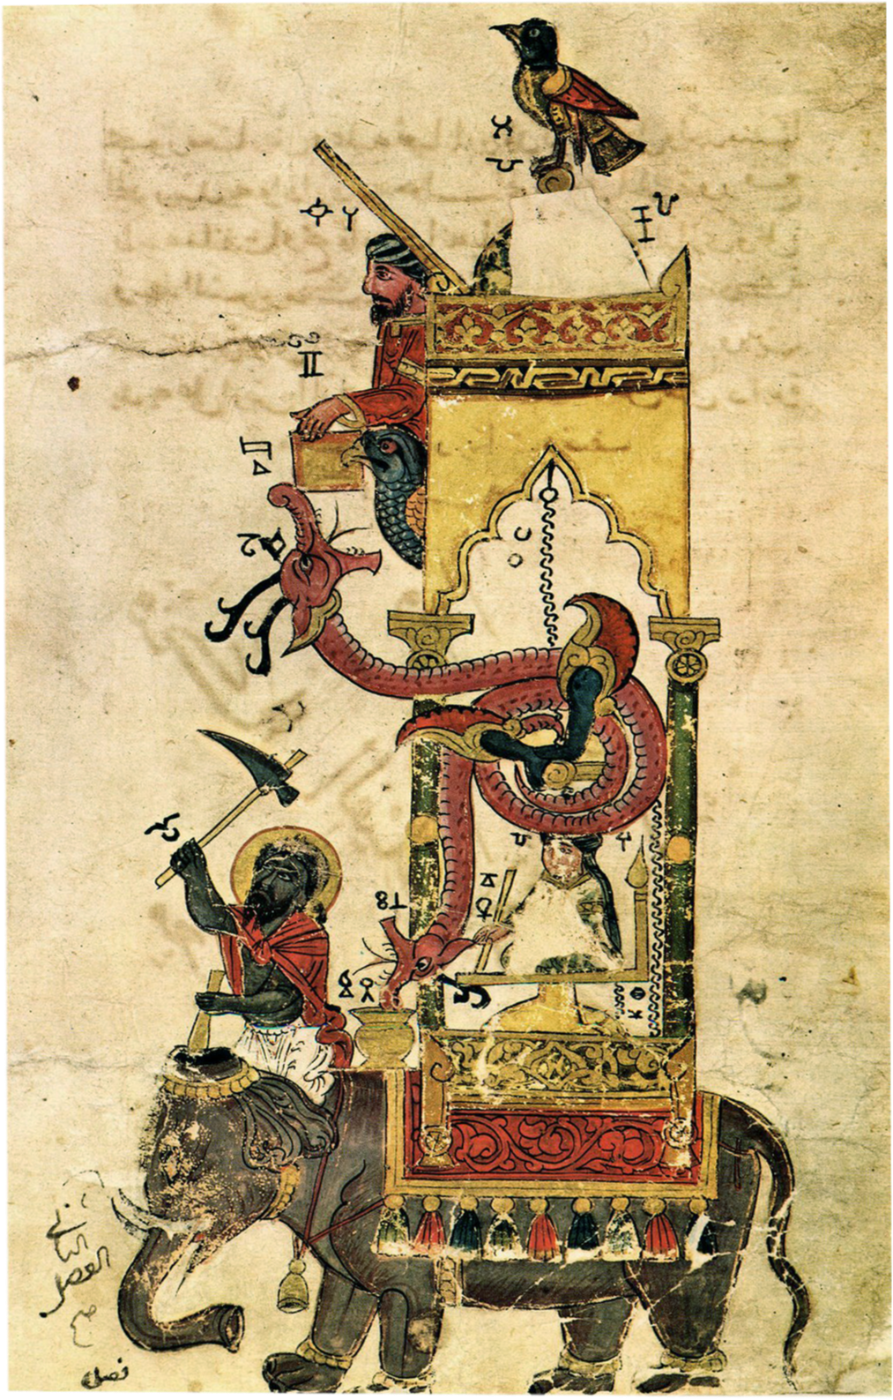 The elephant clock was one of the most famous inventions of al-Jazari